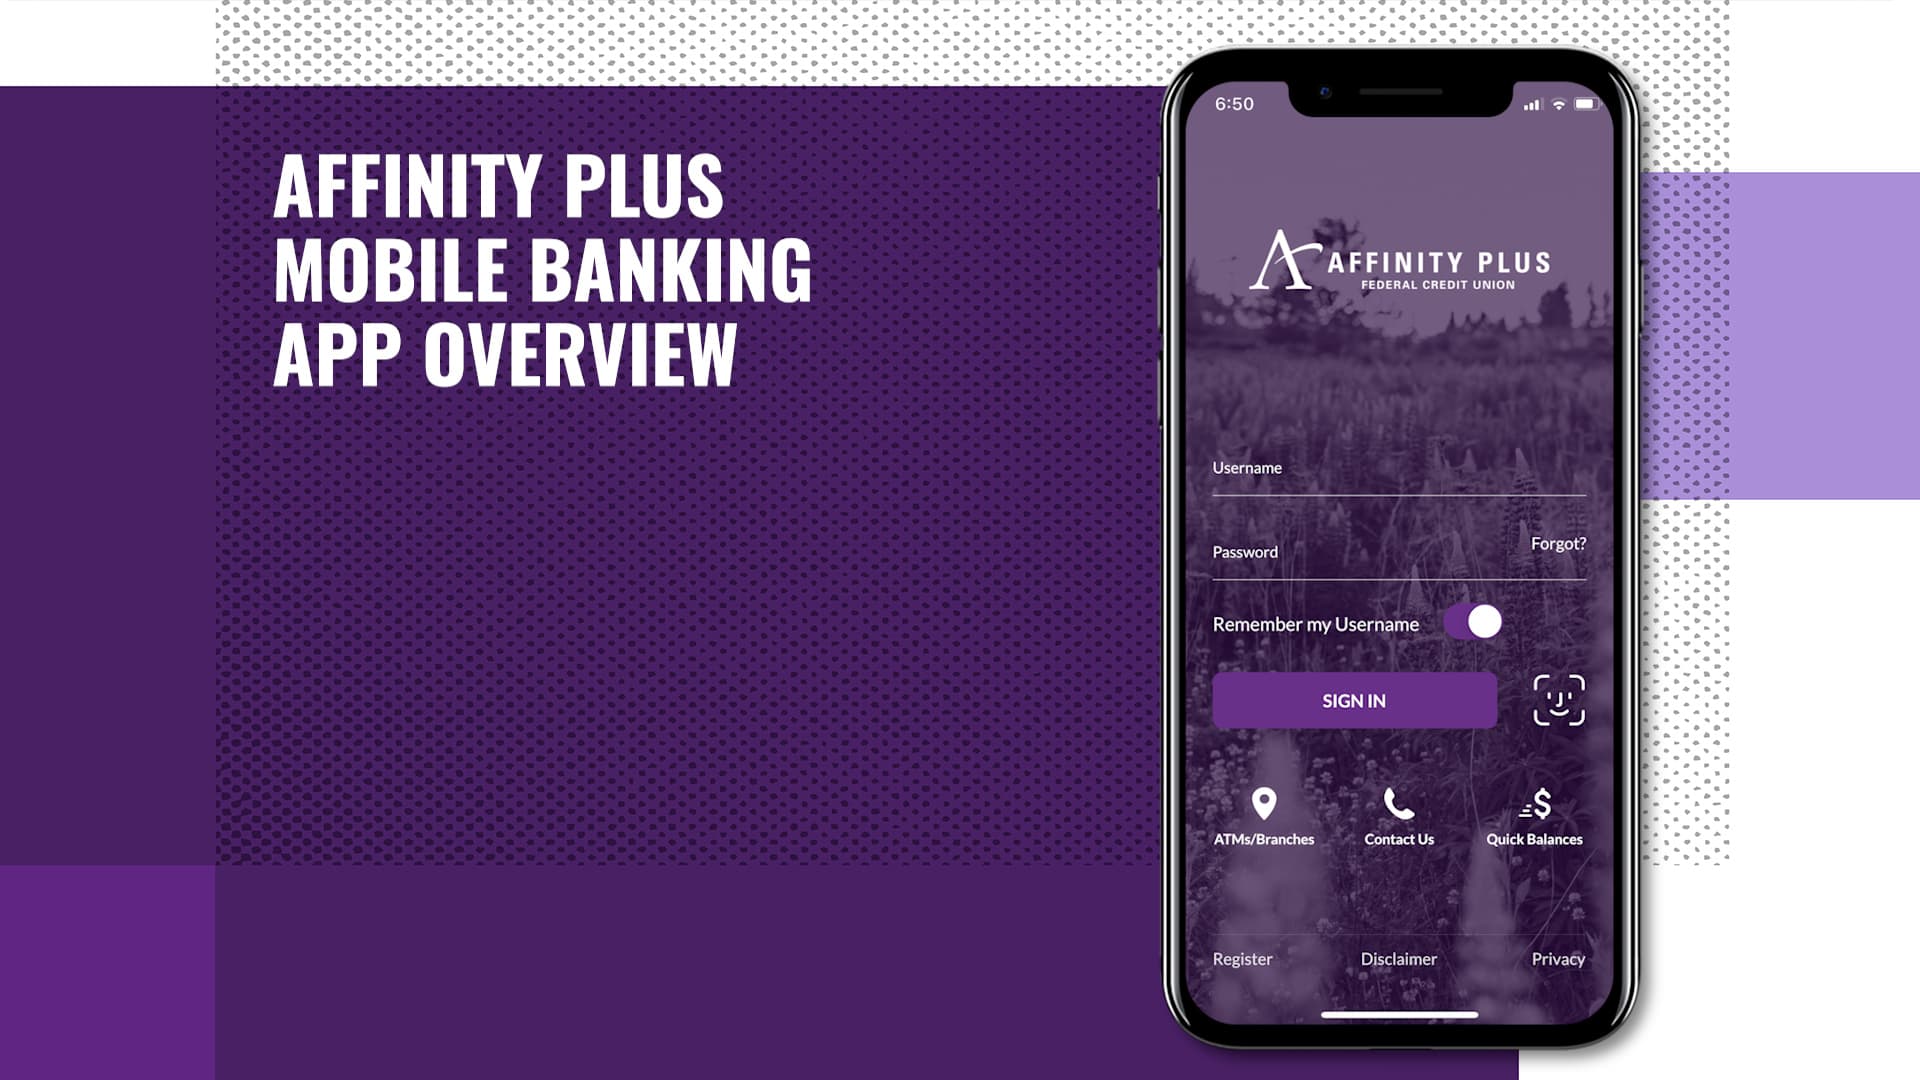 Affinity Plus Mobile Banking App Overview